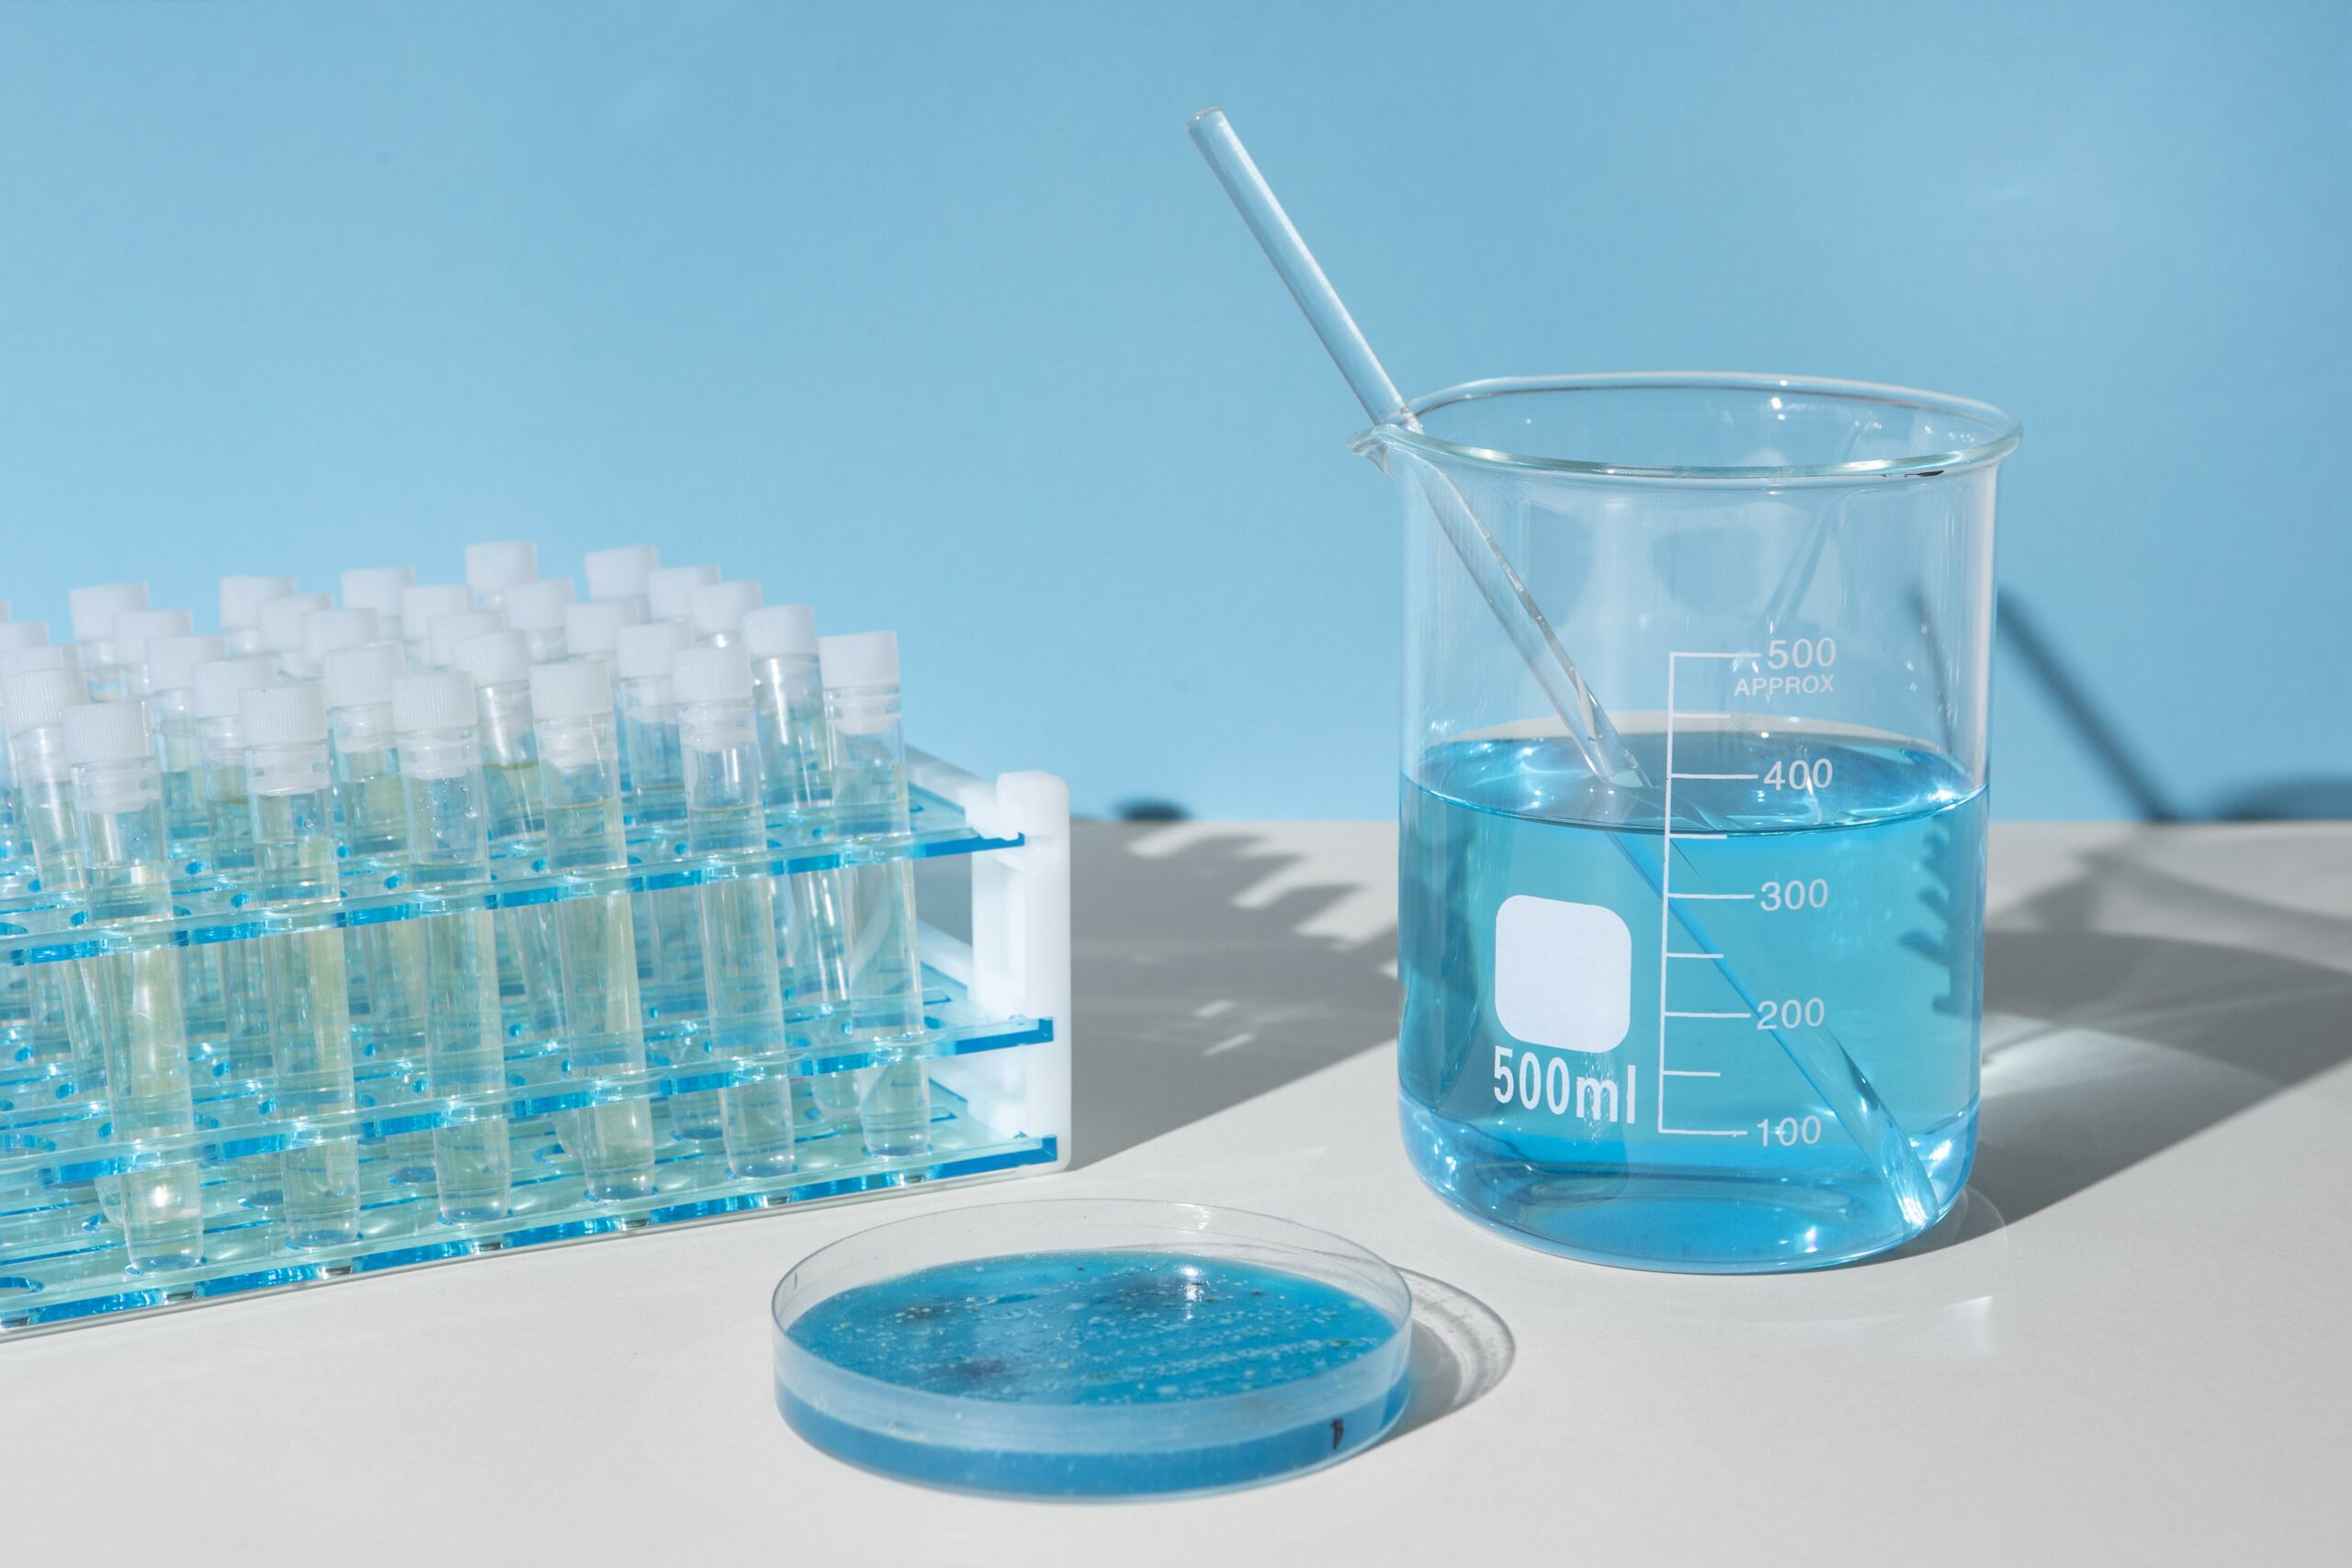 The Top 6 Contaminants That Varify Water Test Kit Can Detect